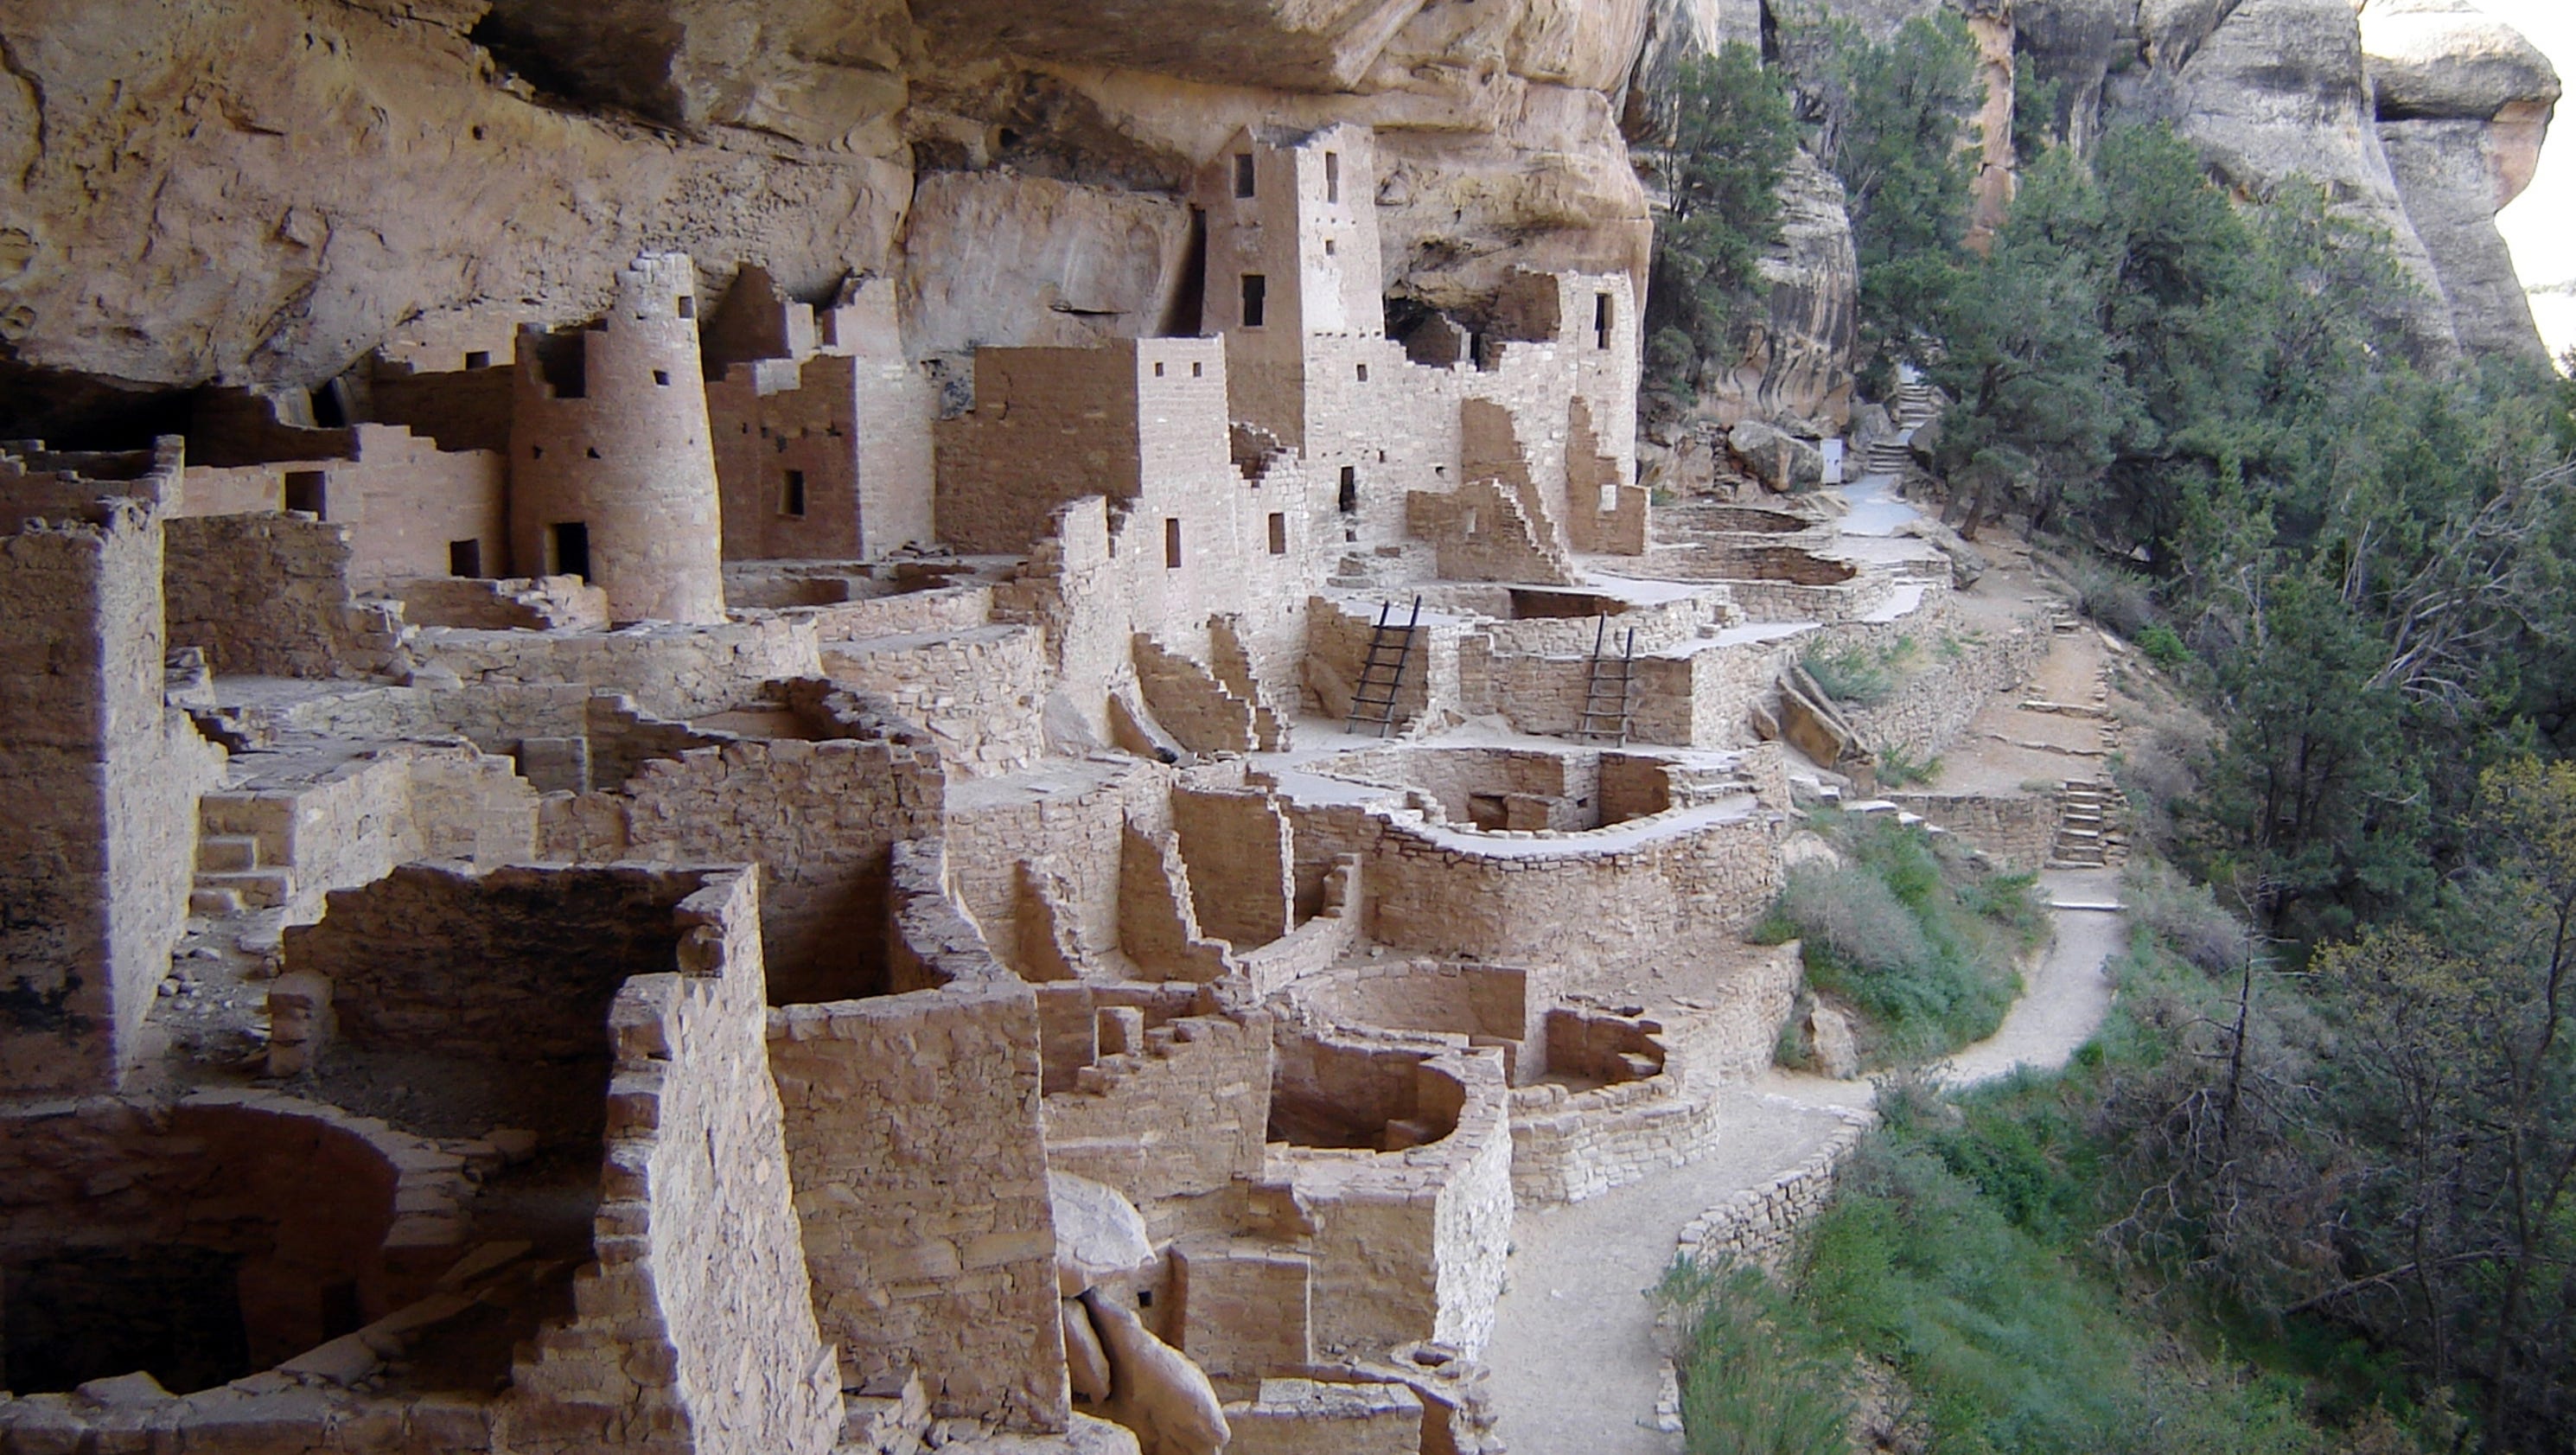 635999554504046520-View-of-Cliff-Palace-from-above-credit-NPS-Photo.jpg